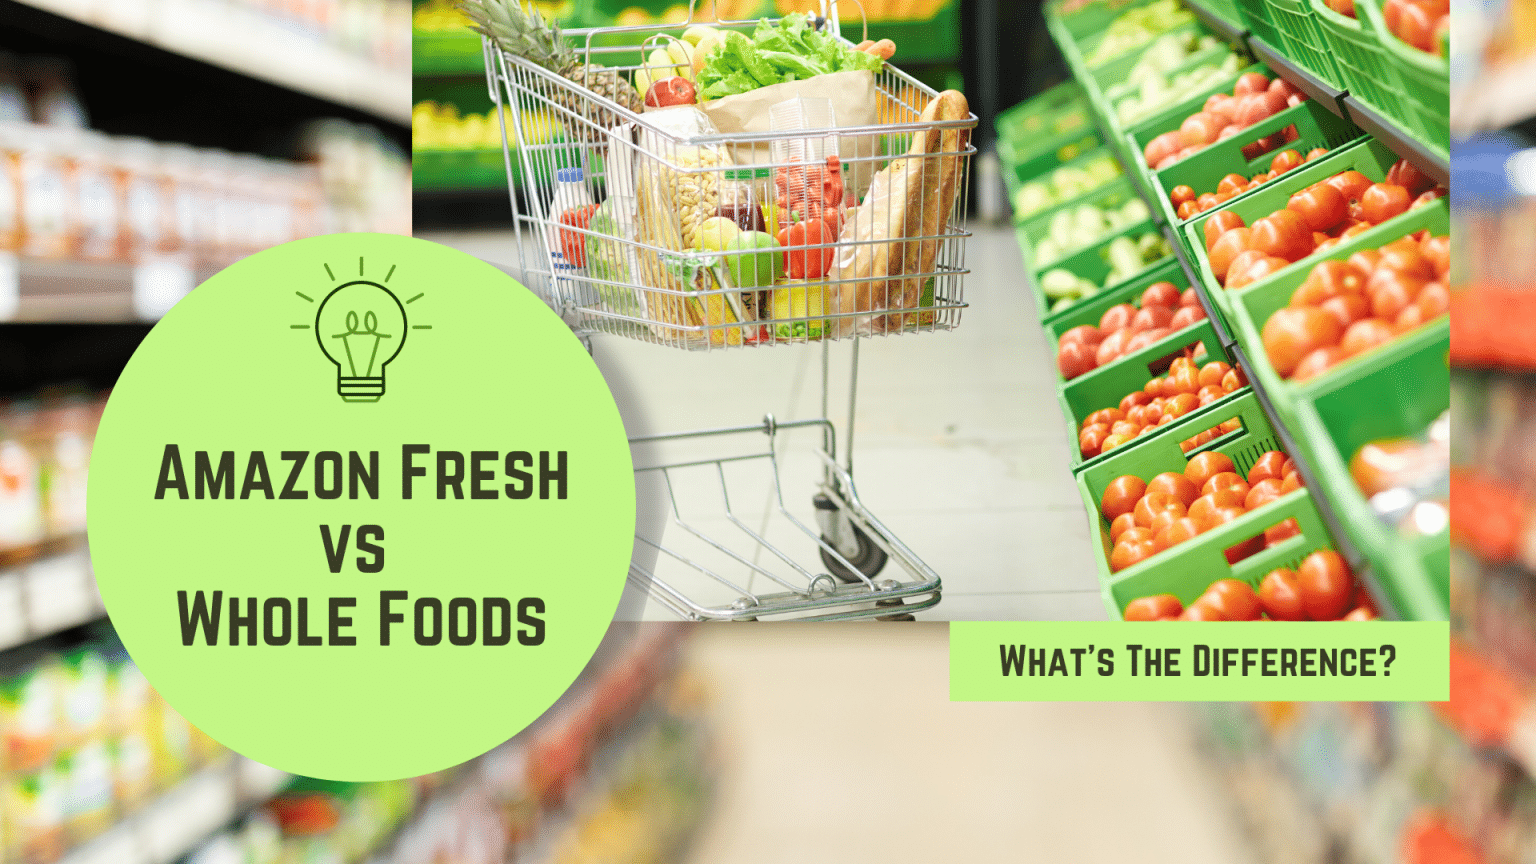 Amazon Fresh vs Whole Foods: What's The Difference?